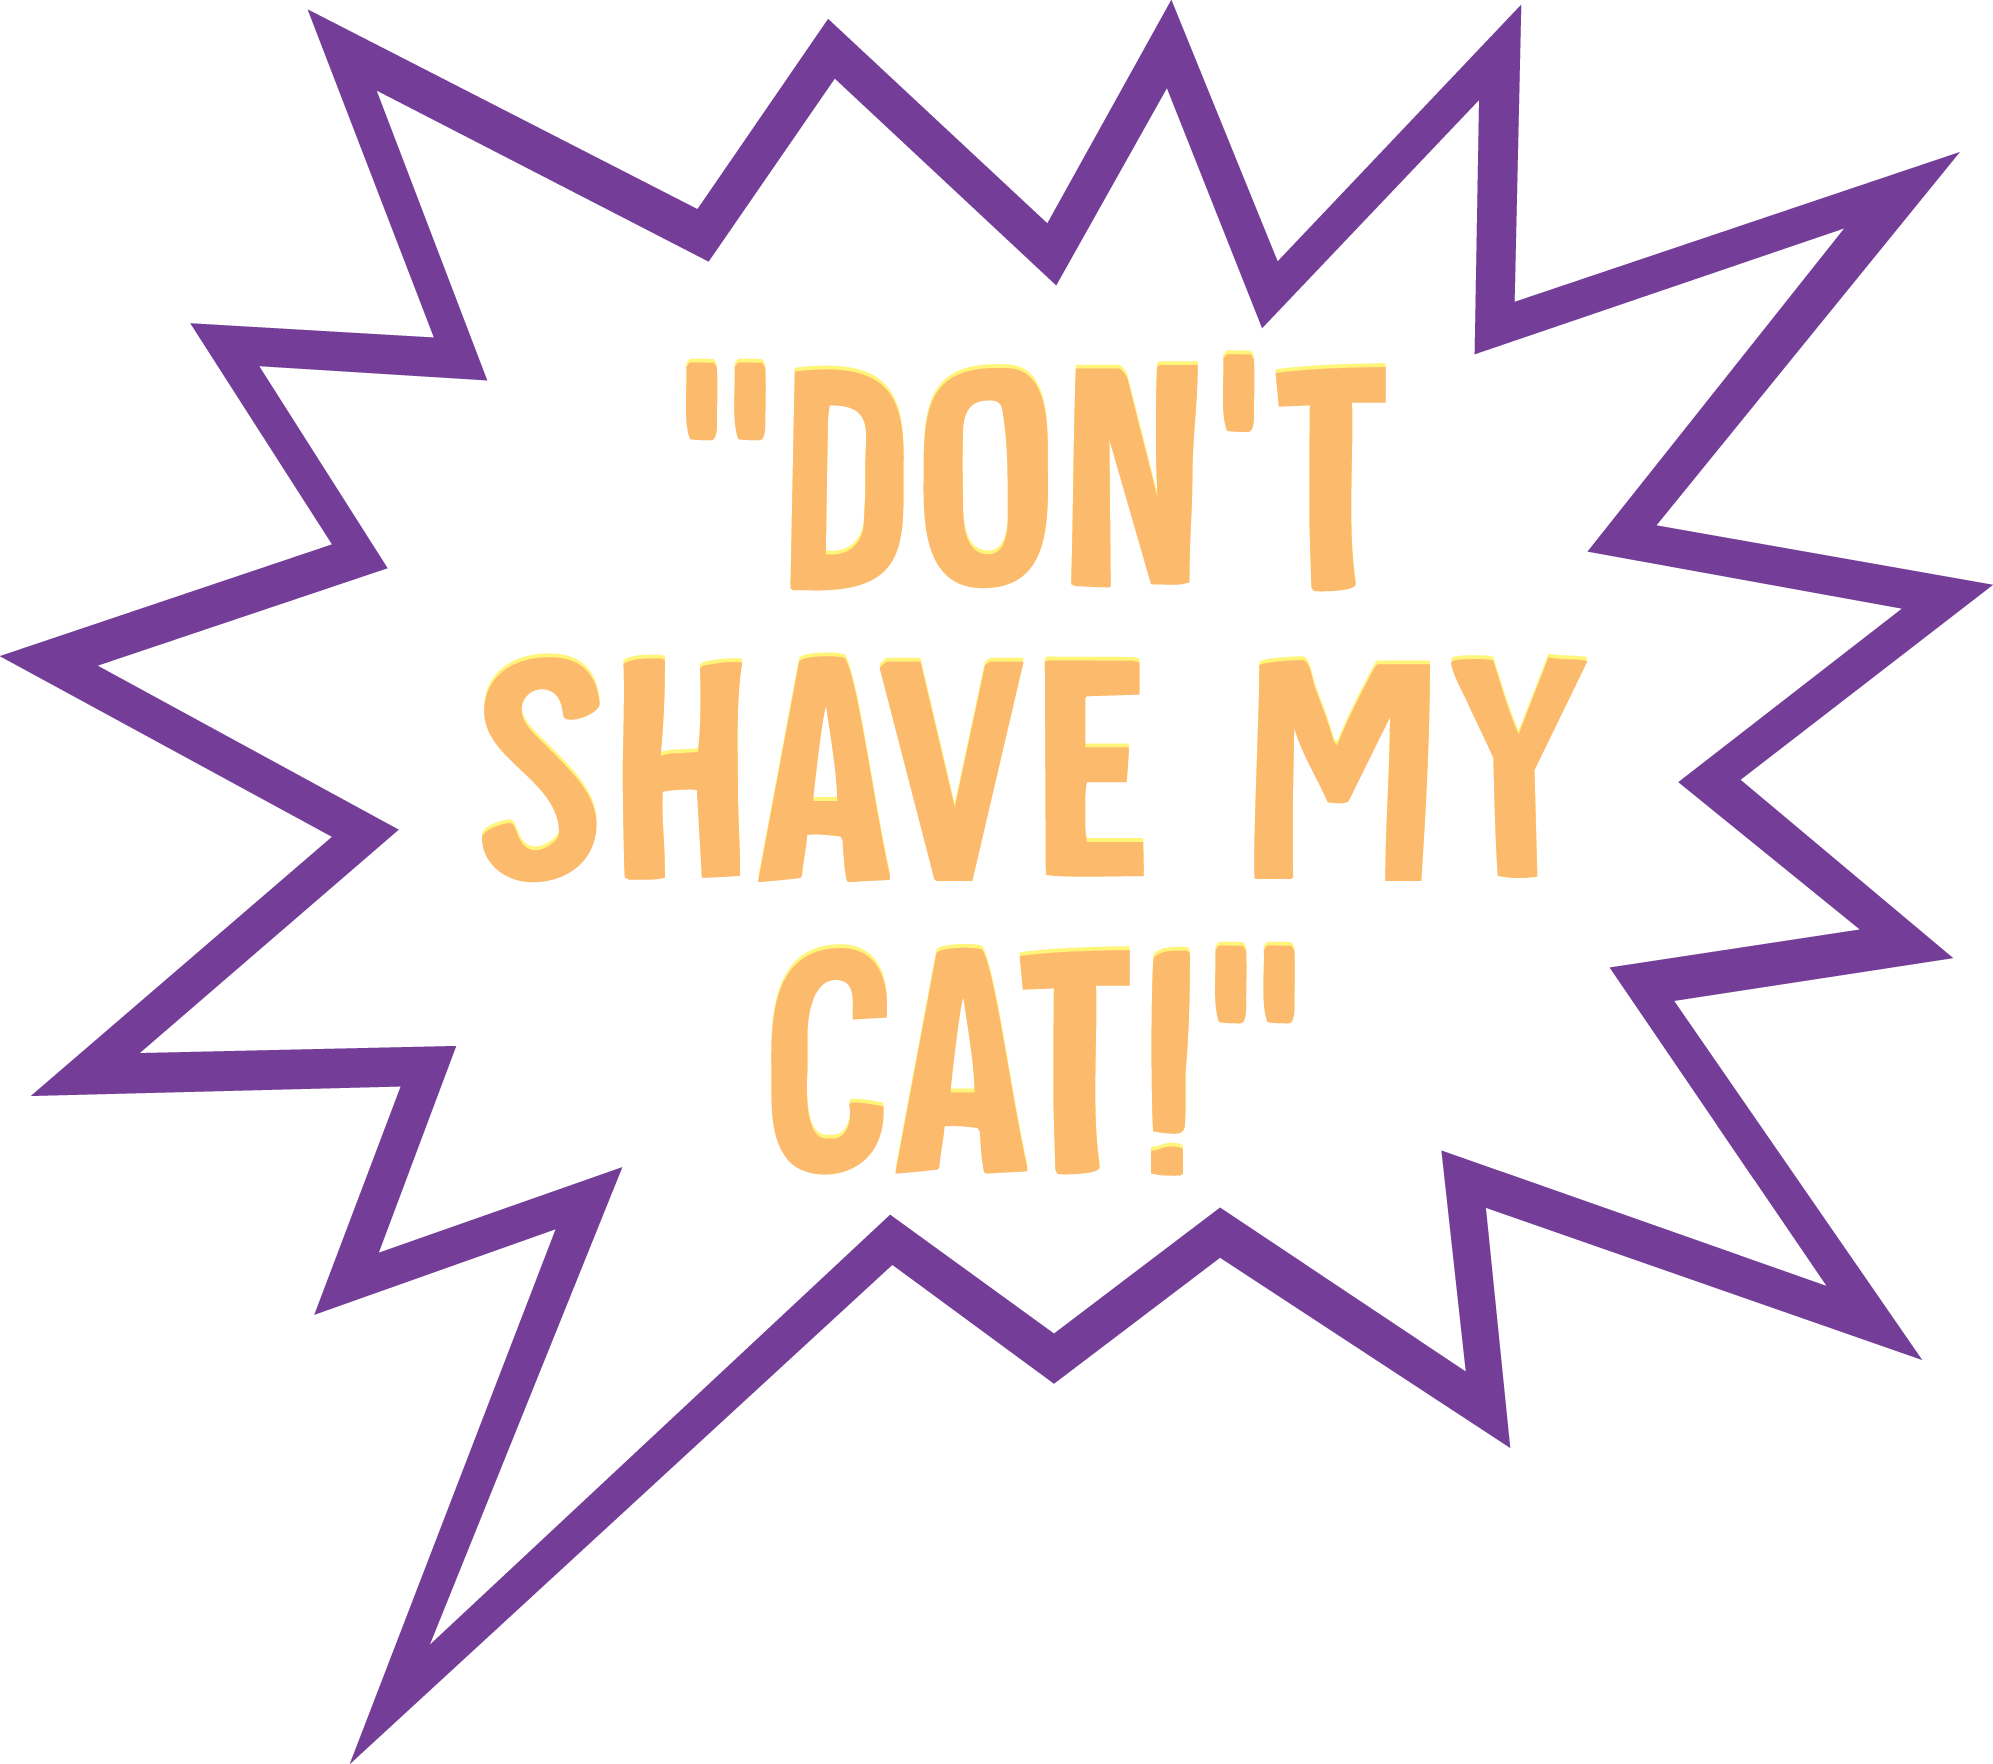 "Don't Shave My Cat!"